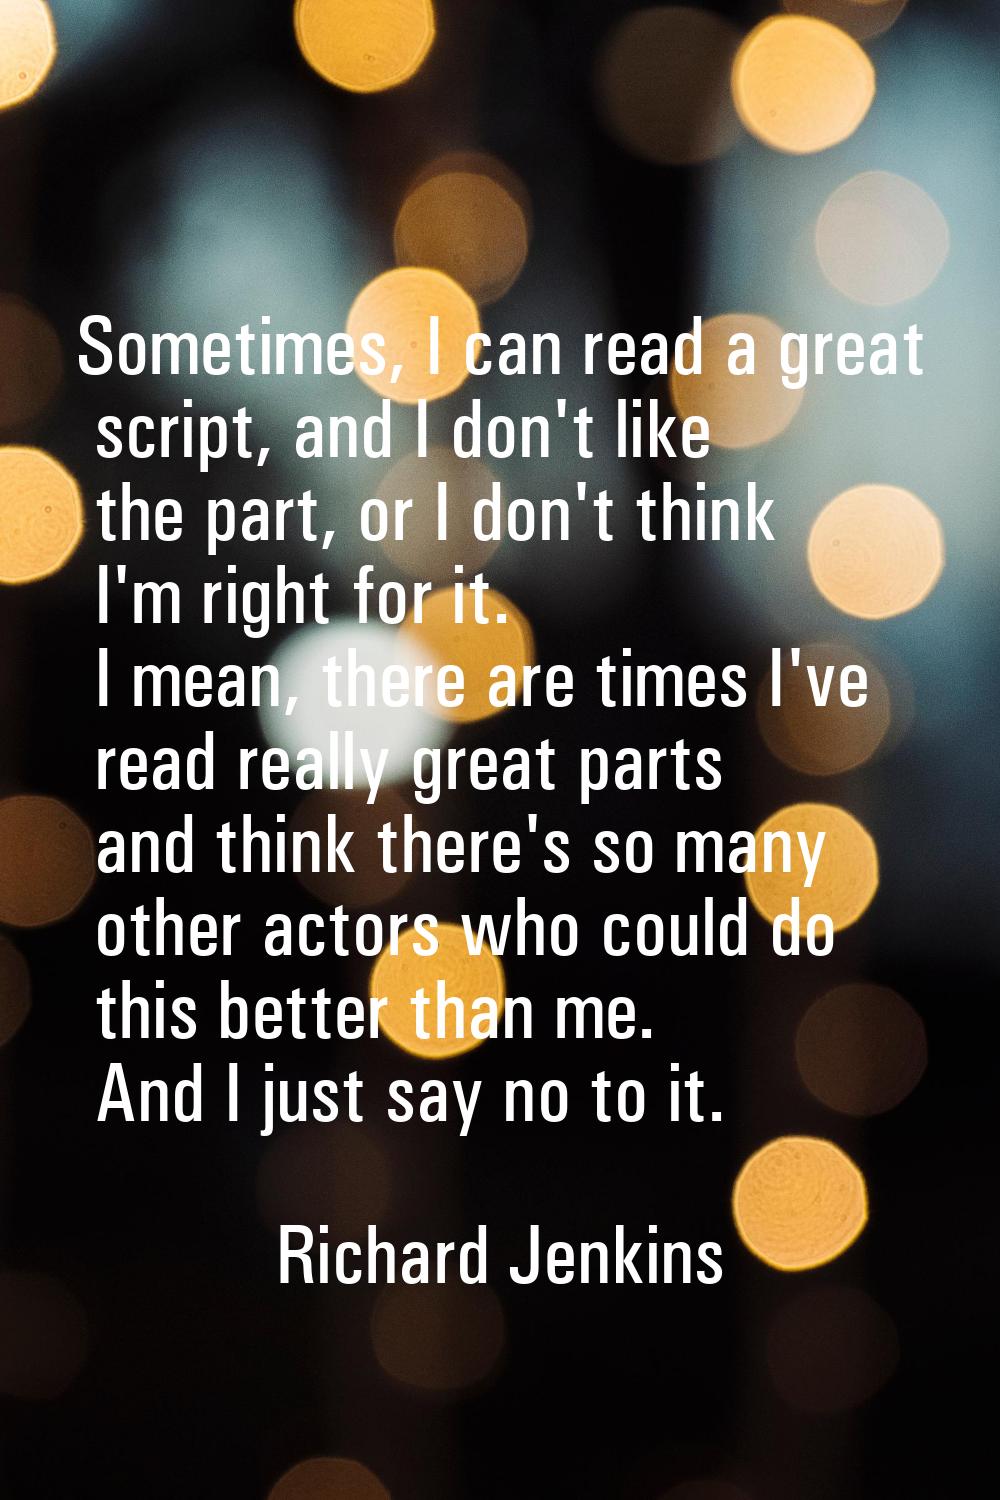 Sometimes, I can read a great script, and I don't like the part, or I don't think I'm right for it.